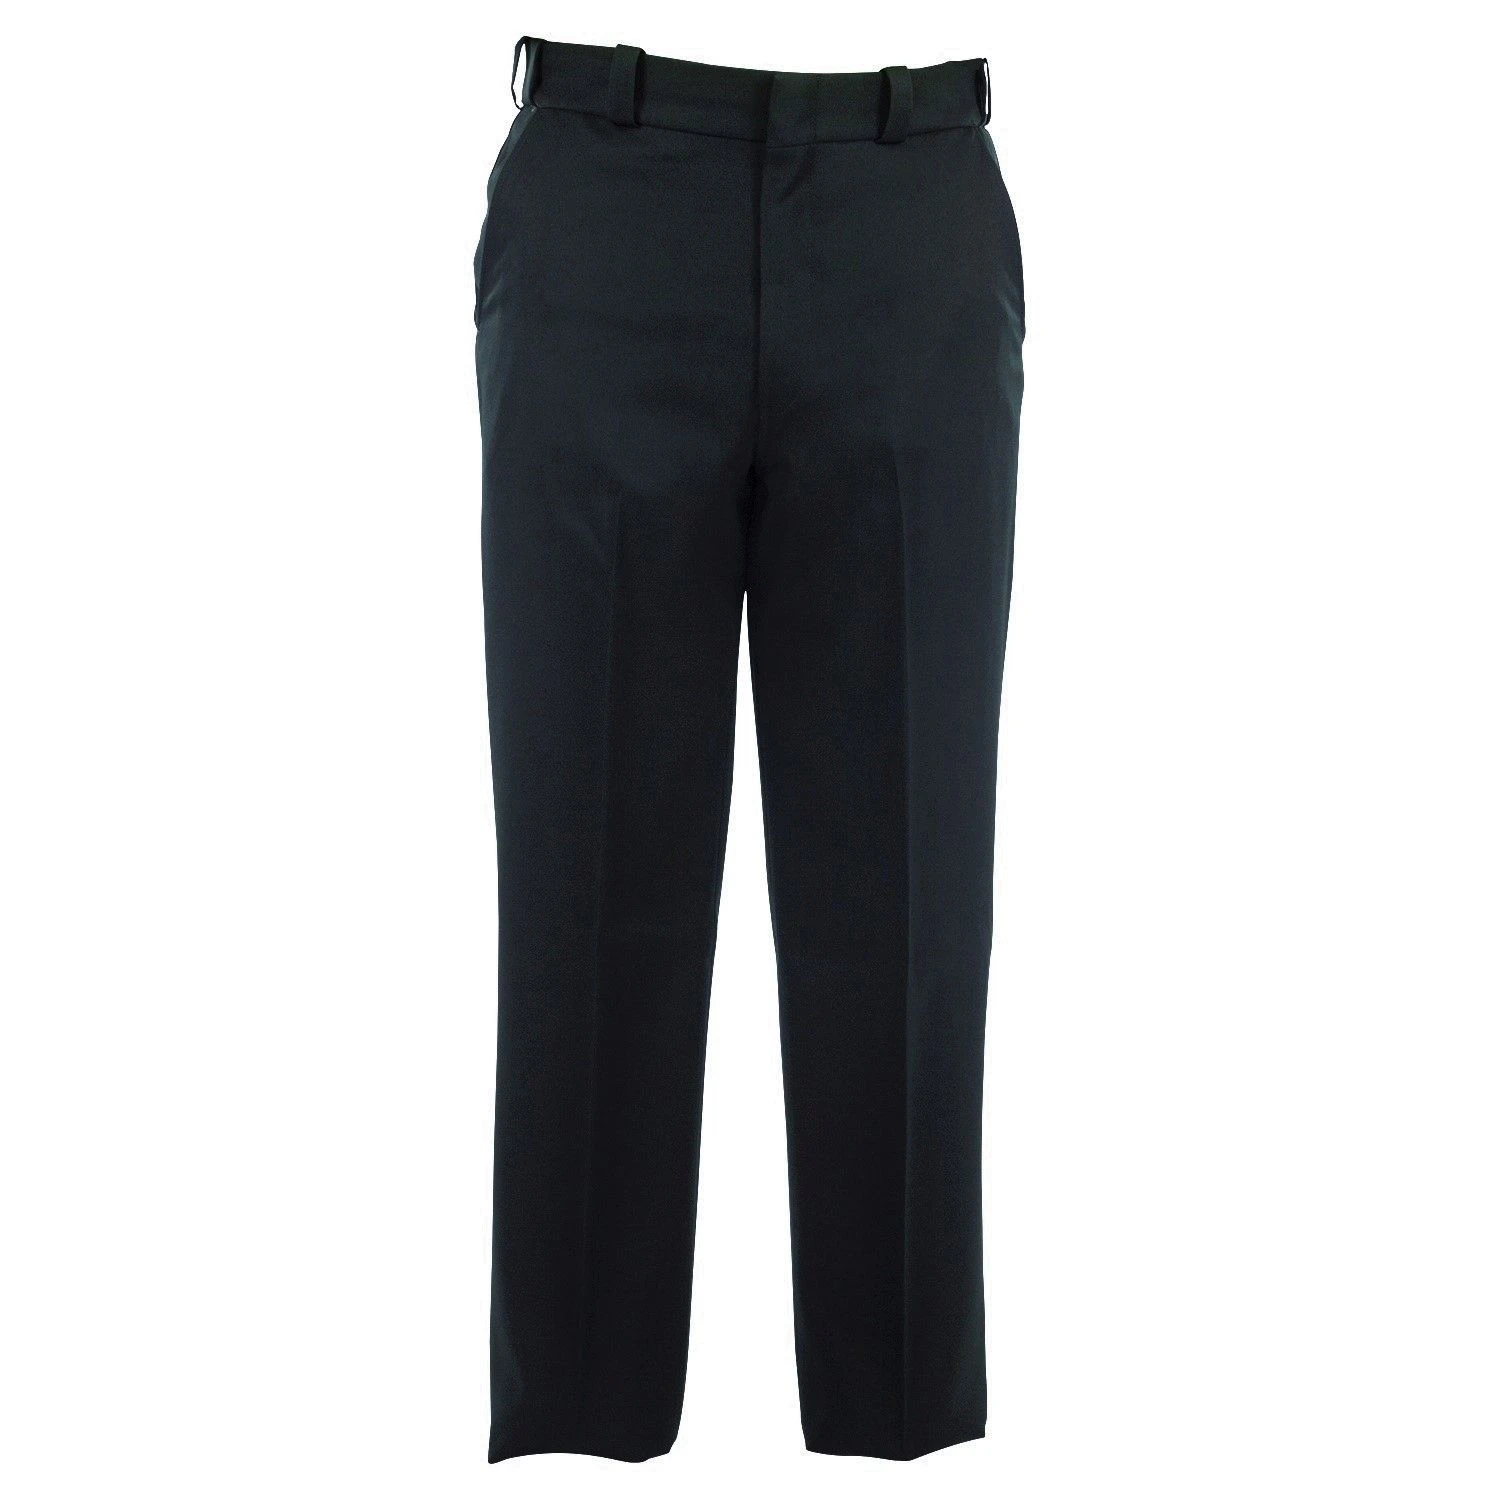 7002 Polyester Trousers - Cal Uniforms